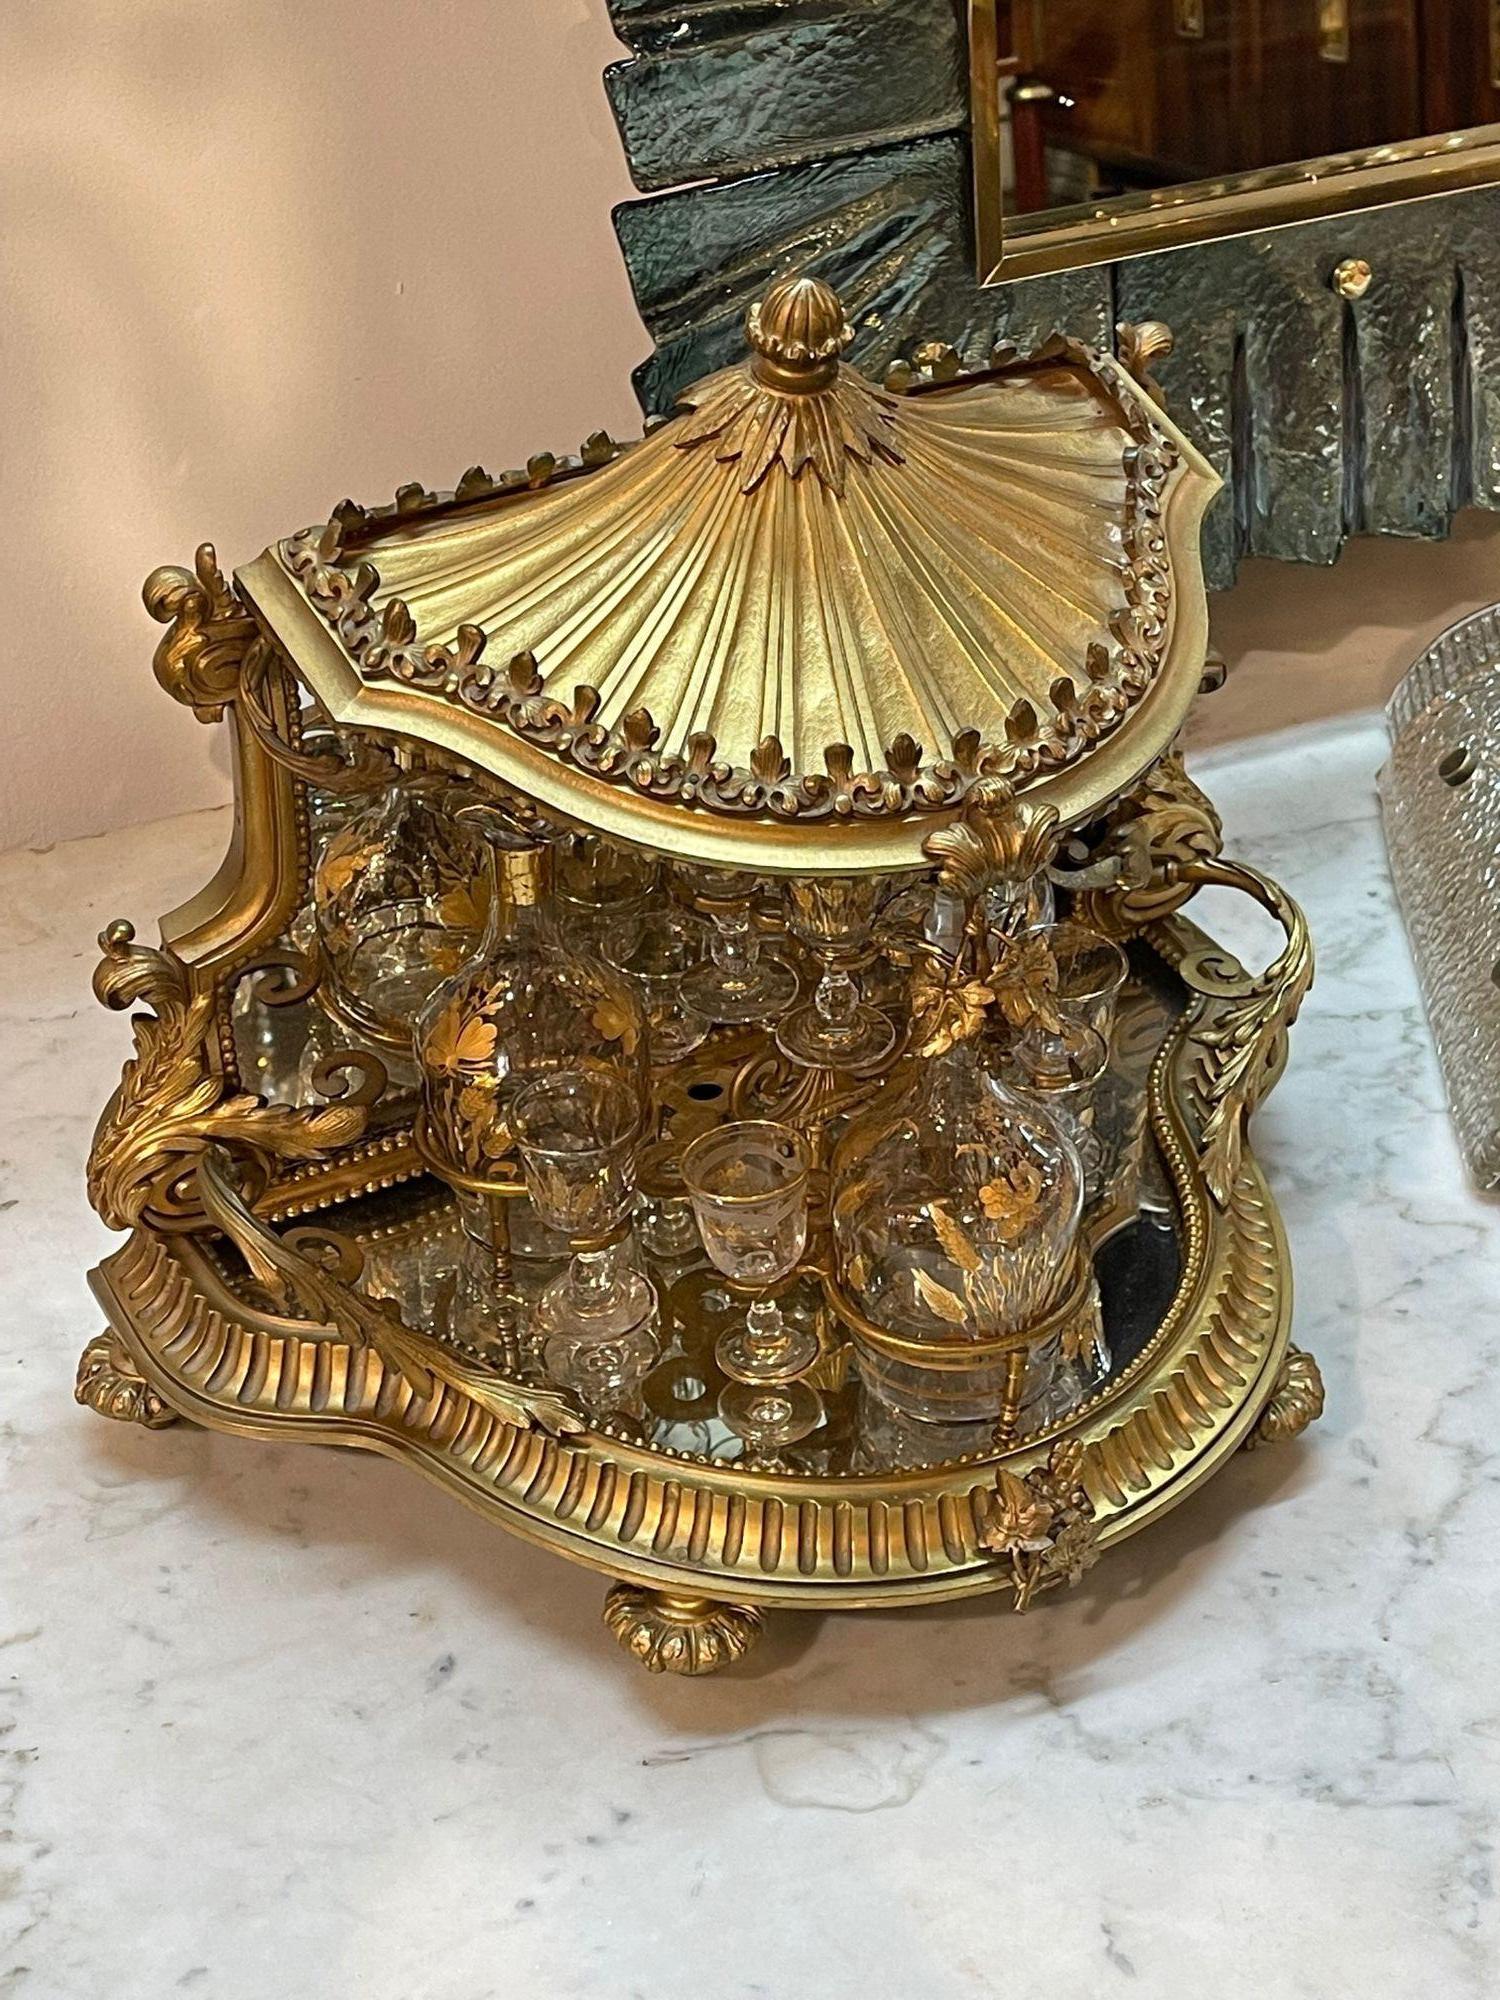 Fine 19th century French gilt bronze tantalus set, attributed to Baccarat. Circa 1870. A fine addition to any home! A timeless and classic touch for a fine interior.